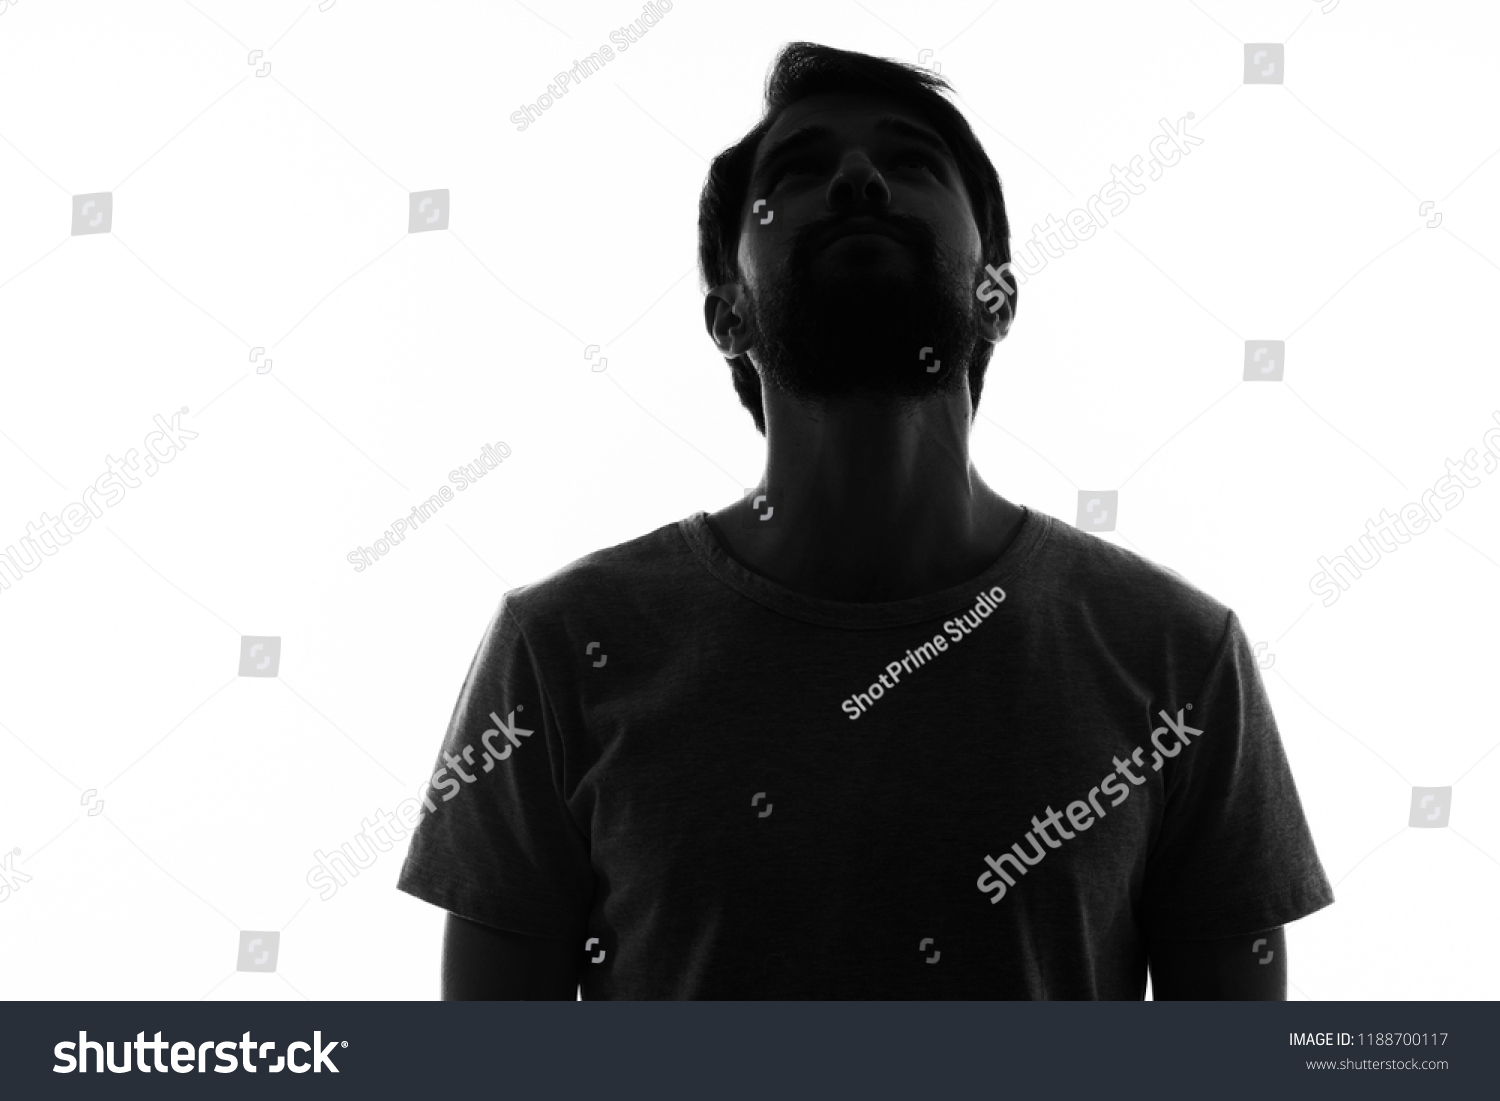 man cant head back, dark silhouette on a light background                               #1188700117